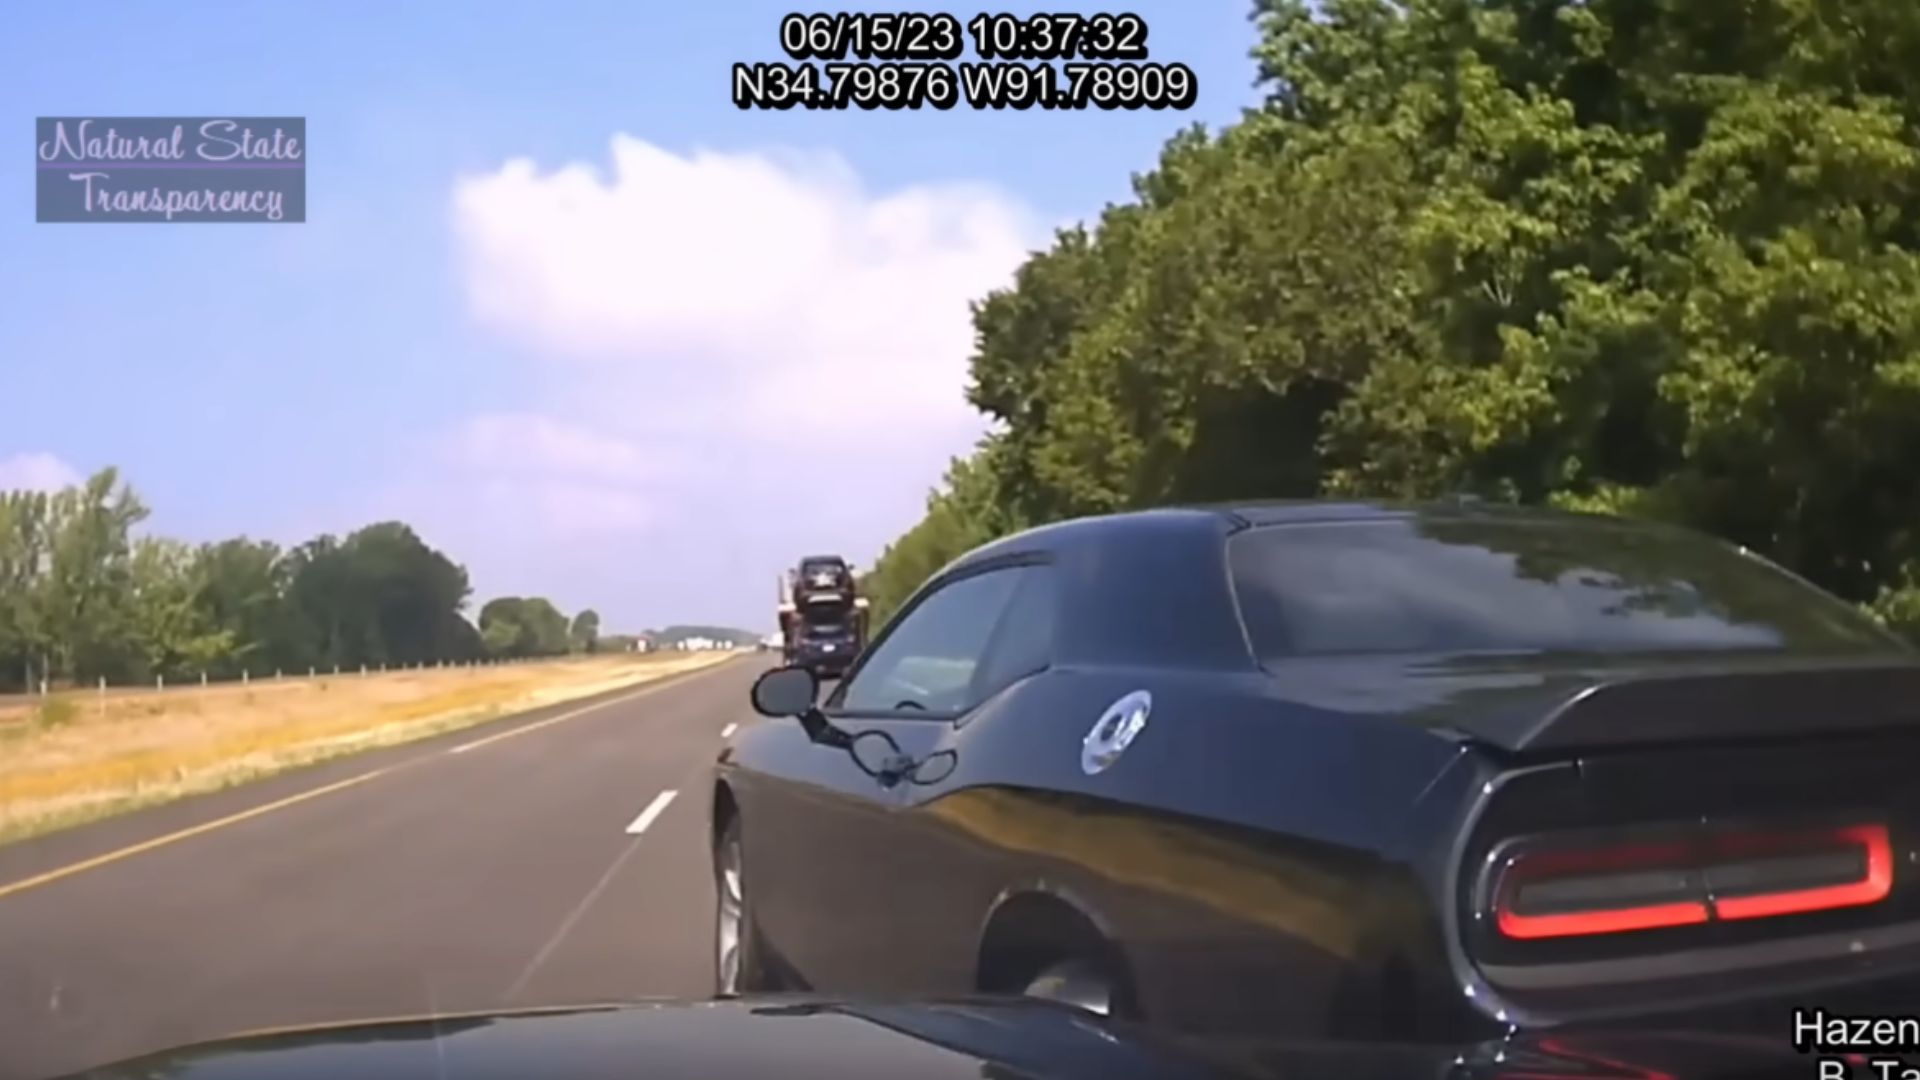 Watch A Police Chief PIT A Fleeing Dodge Challenger